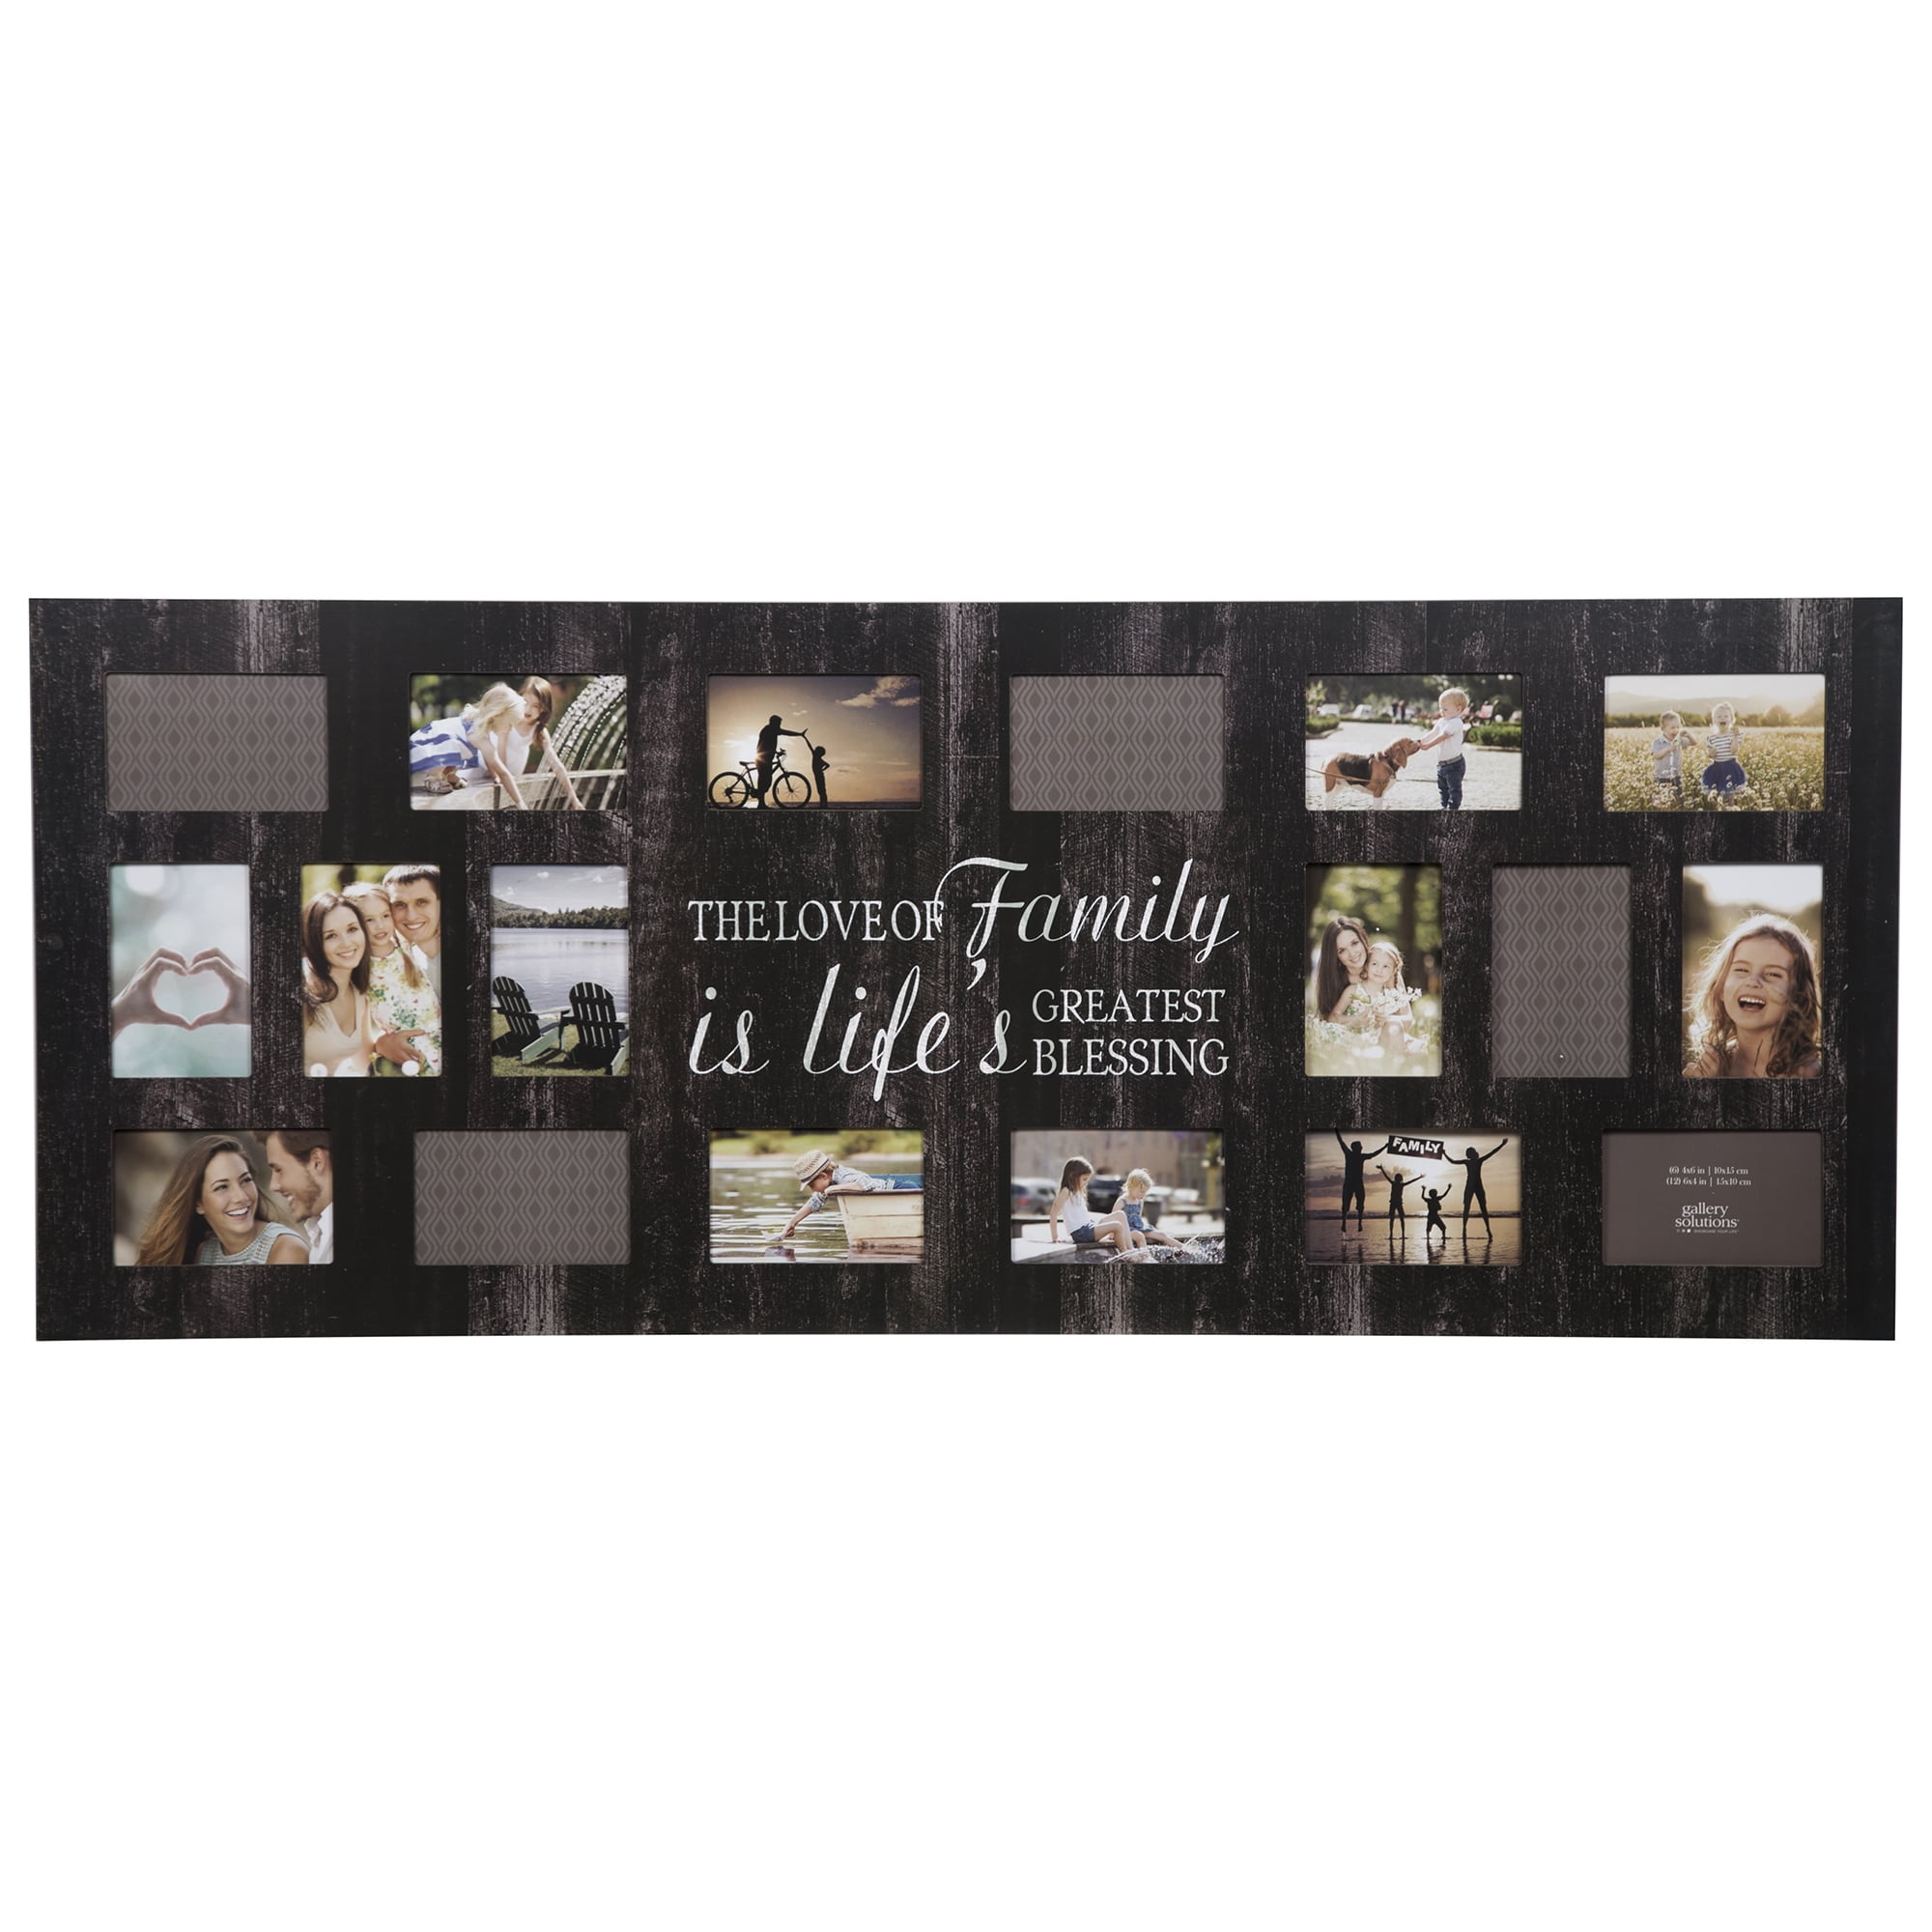 Large Multi Picture Photo Aperture Frame Fits 15 Photos Of Size 6” X 6” Inches 